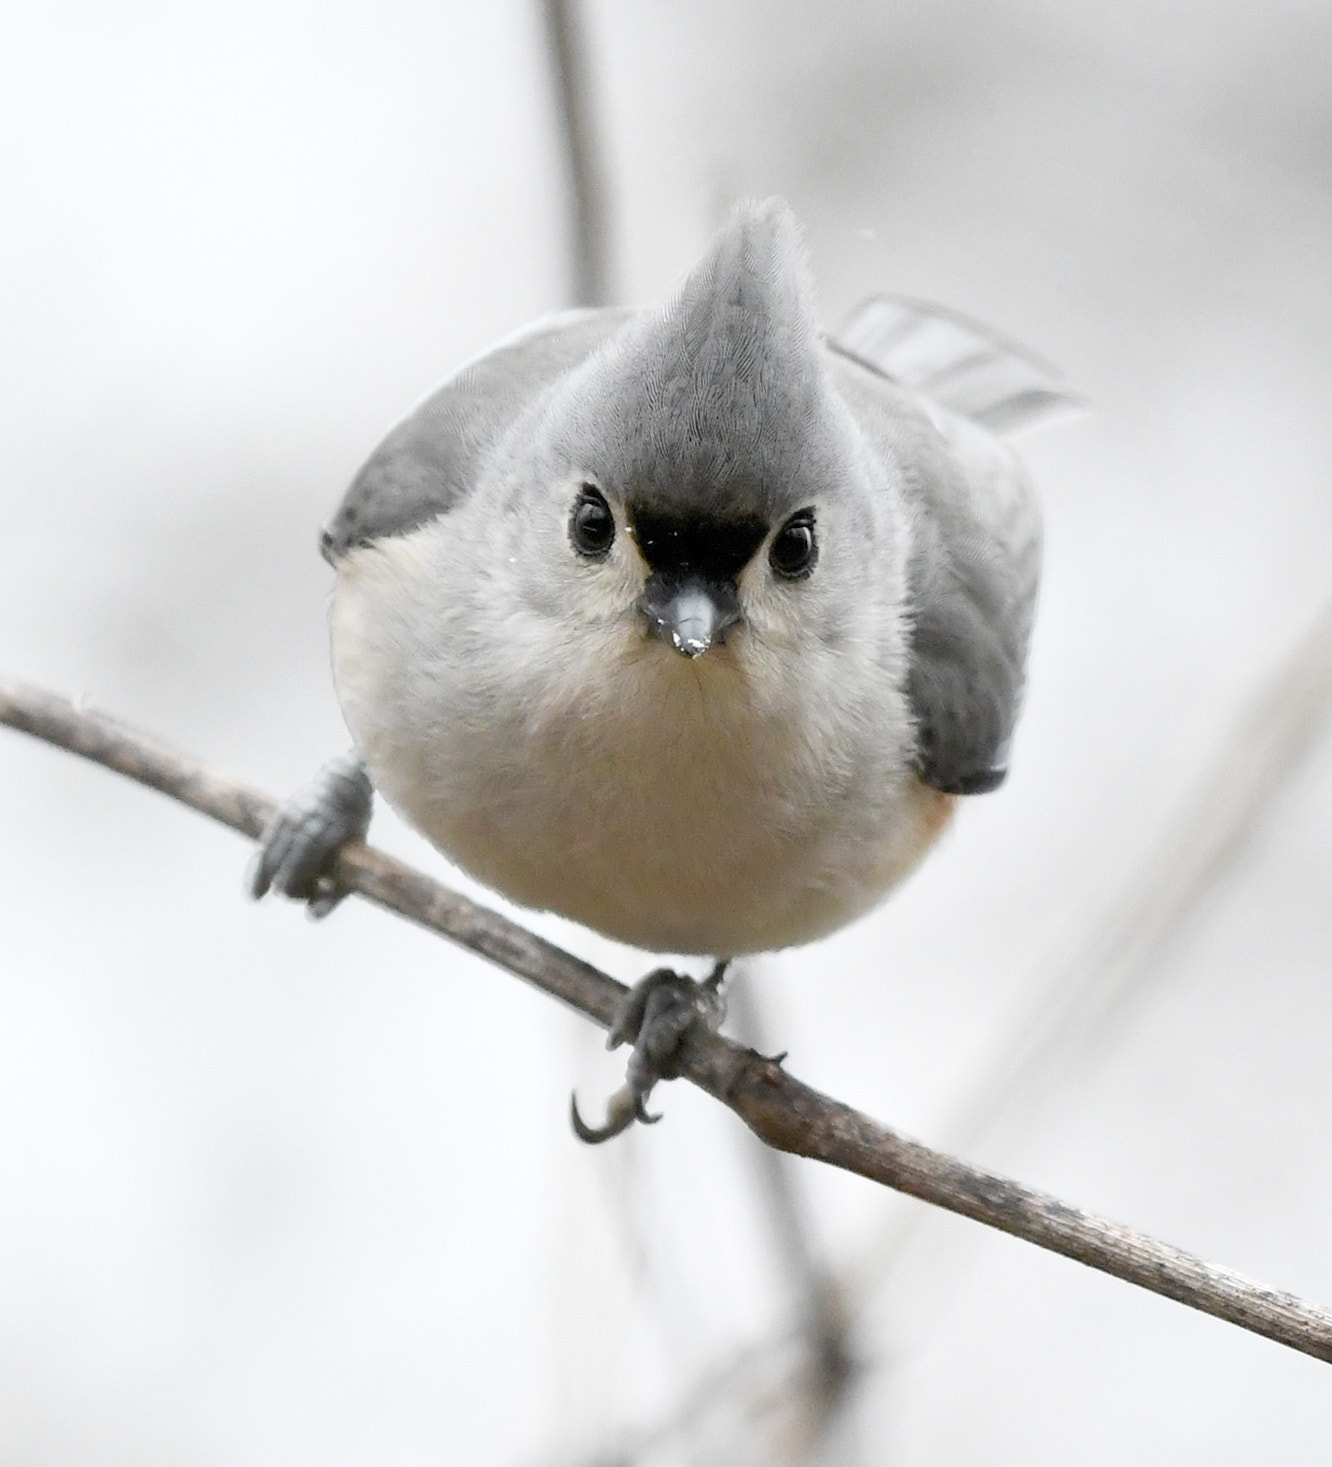 A small, grey song bird with a feathery crest sits on a twig, staring down a pretender. Tufted titmouse.